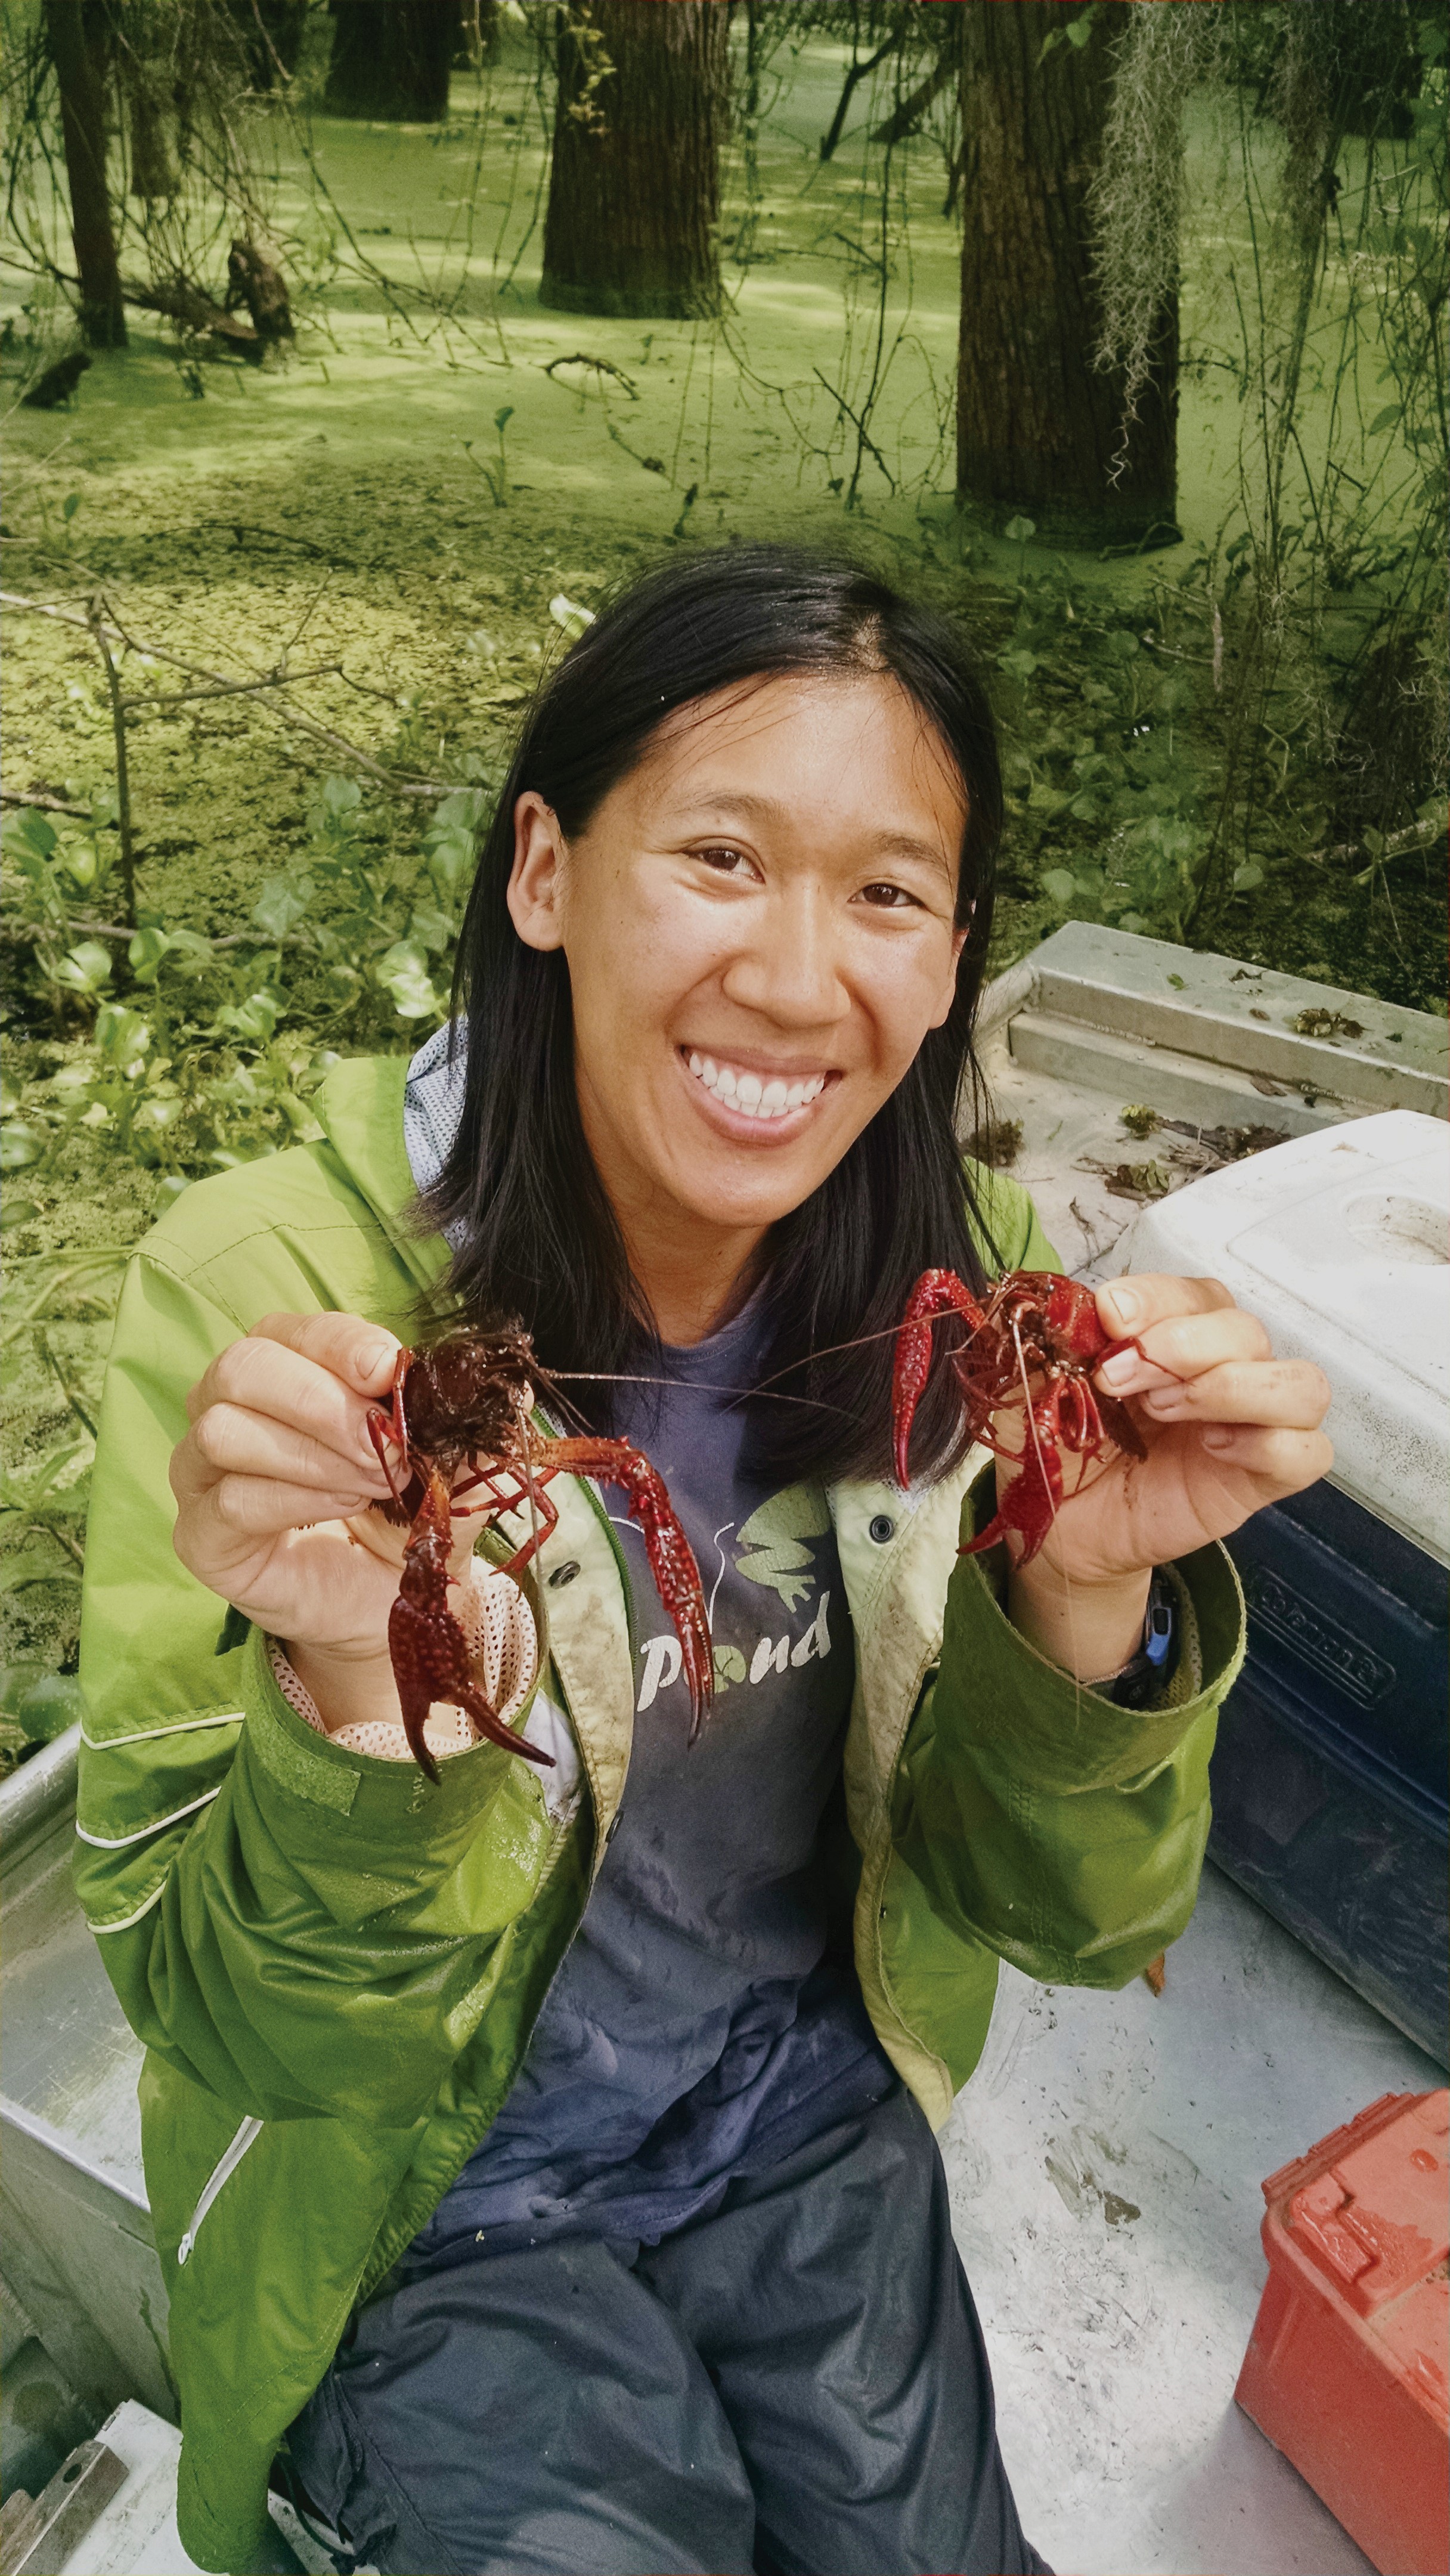 A smiling woman holds up a crawfish in each hand.